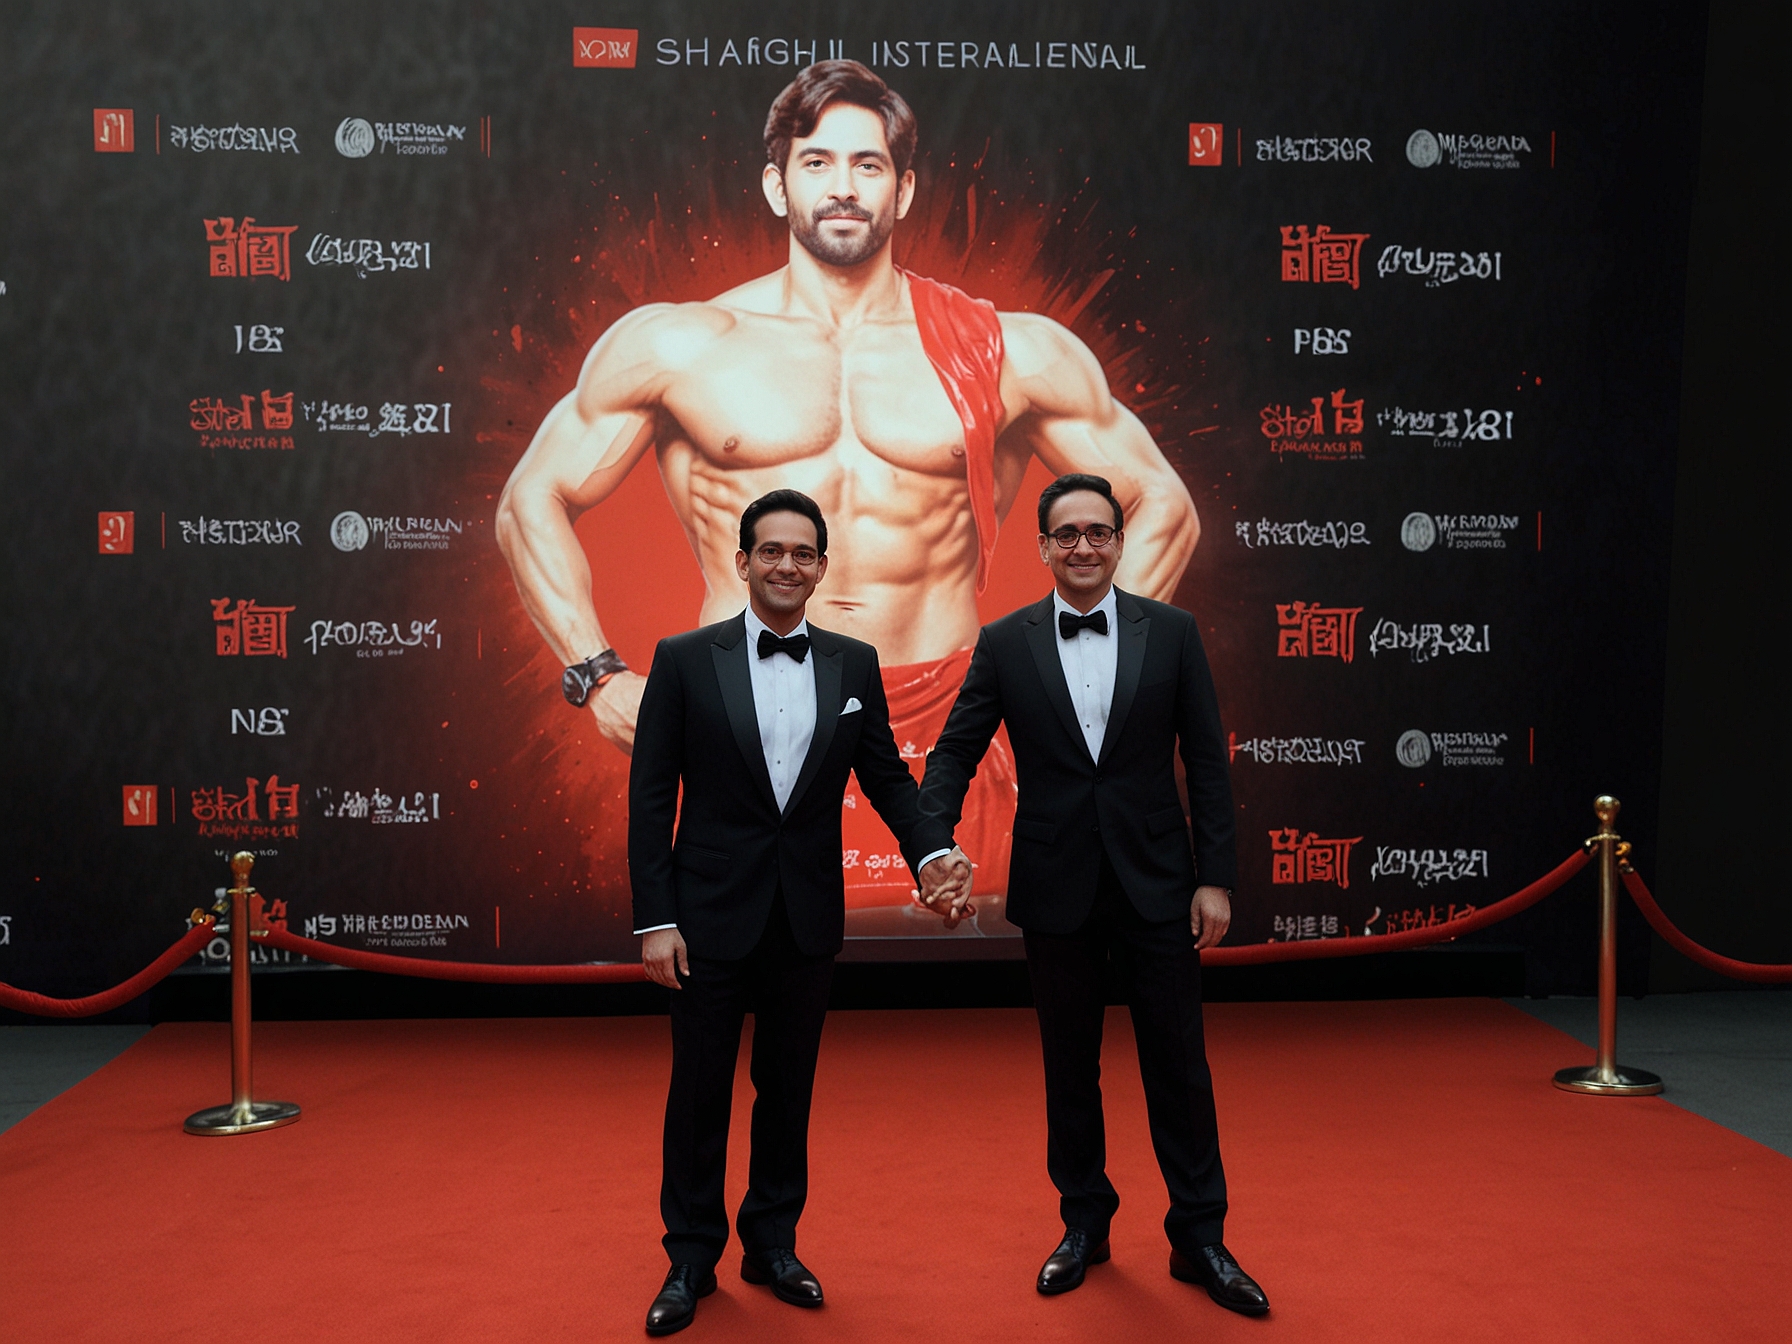 Vikrant Massey and Vidhu Vinod Chopra stand proudly at the red carpet of the Shanghai International Film Festival, signifying '12th Fail's' milestone in global cinema.